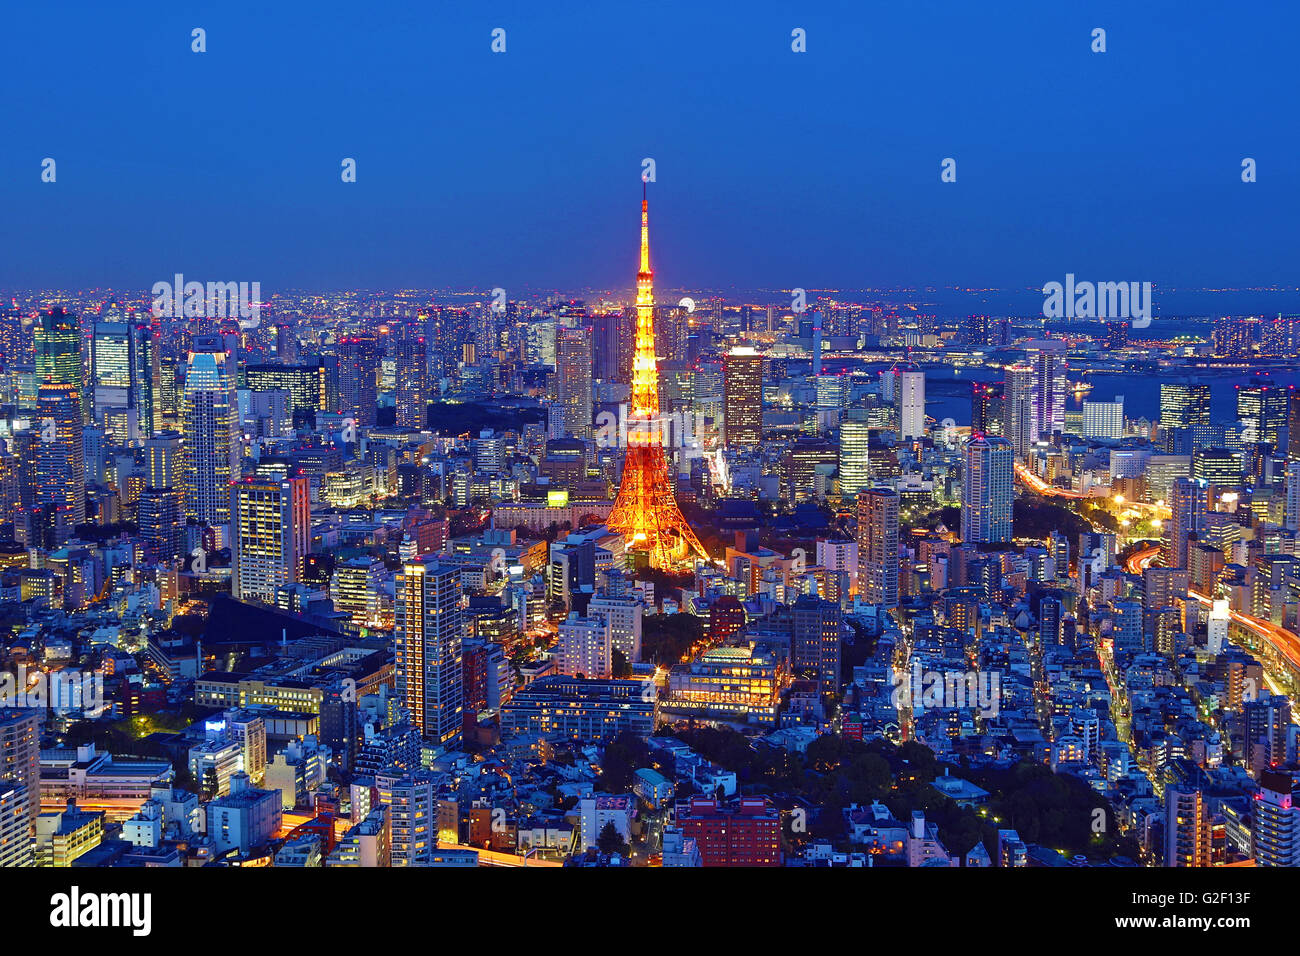 General city skyline night view with the Tokyo Tower of 